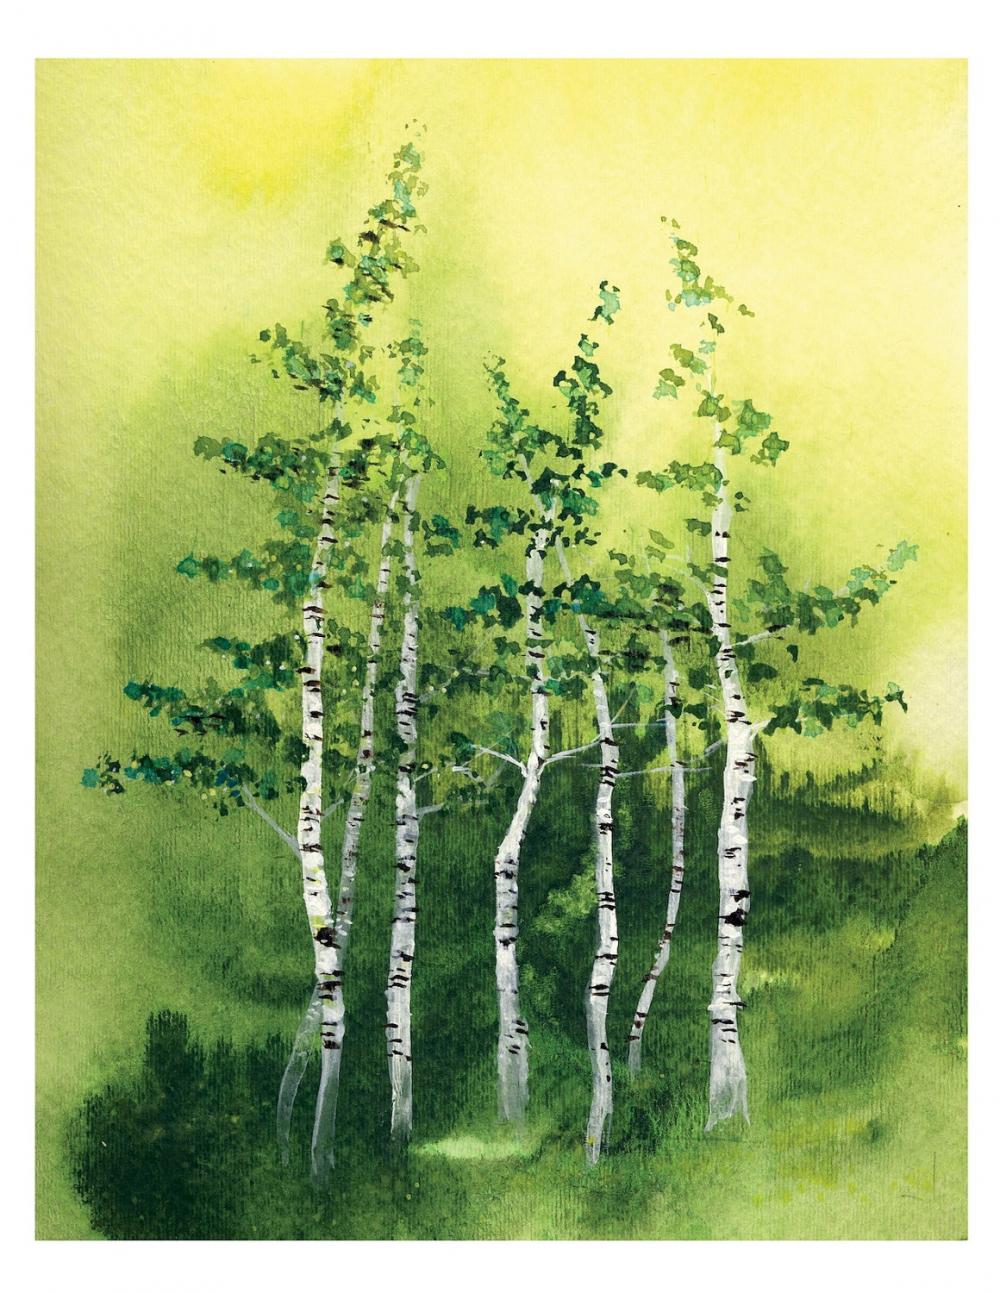 8x10 "tranquil Grove" Fine Art Print Birch Trees Woods Forest Natural Landscape Green Leaves Ink Watercolor Painting